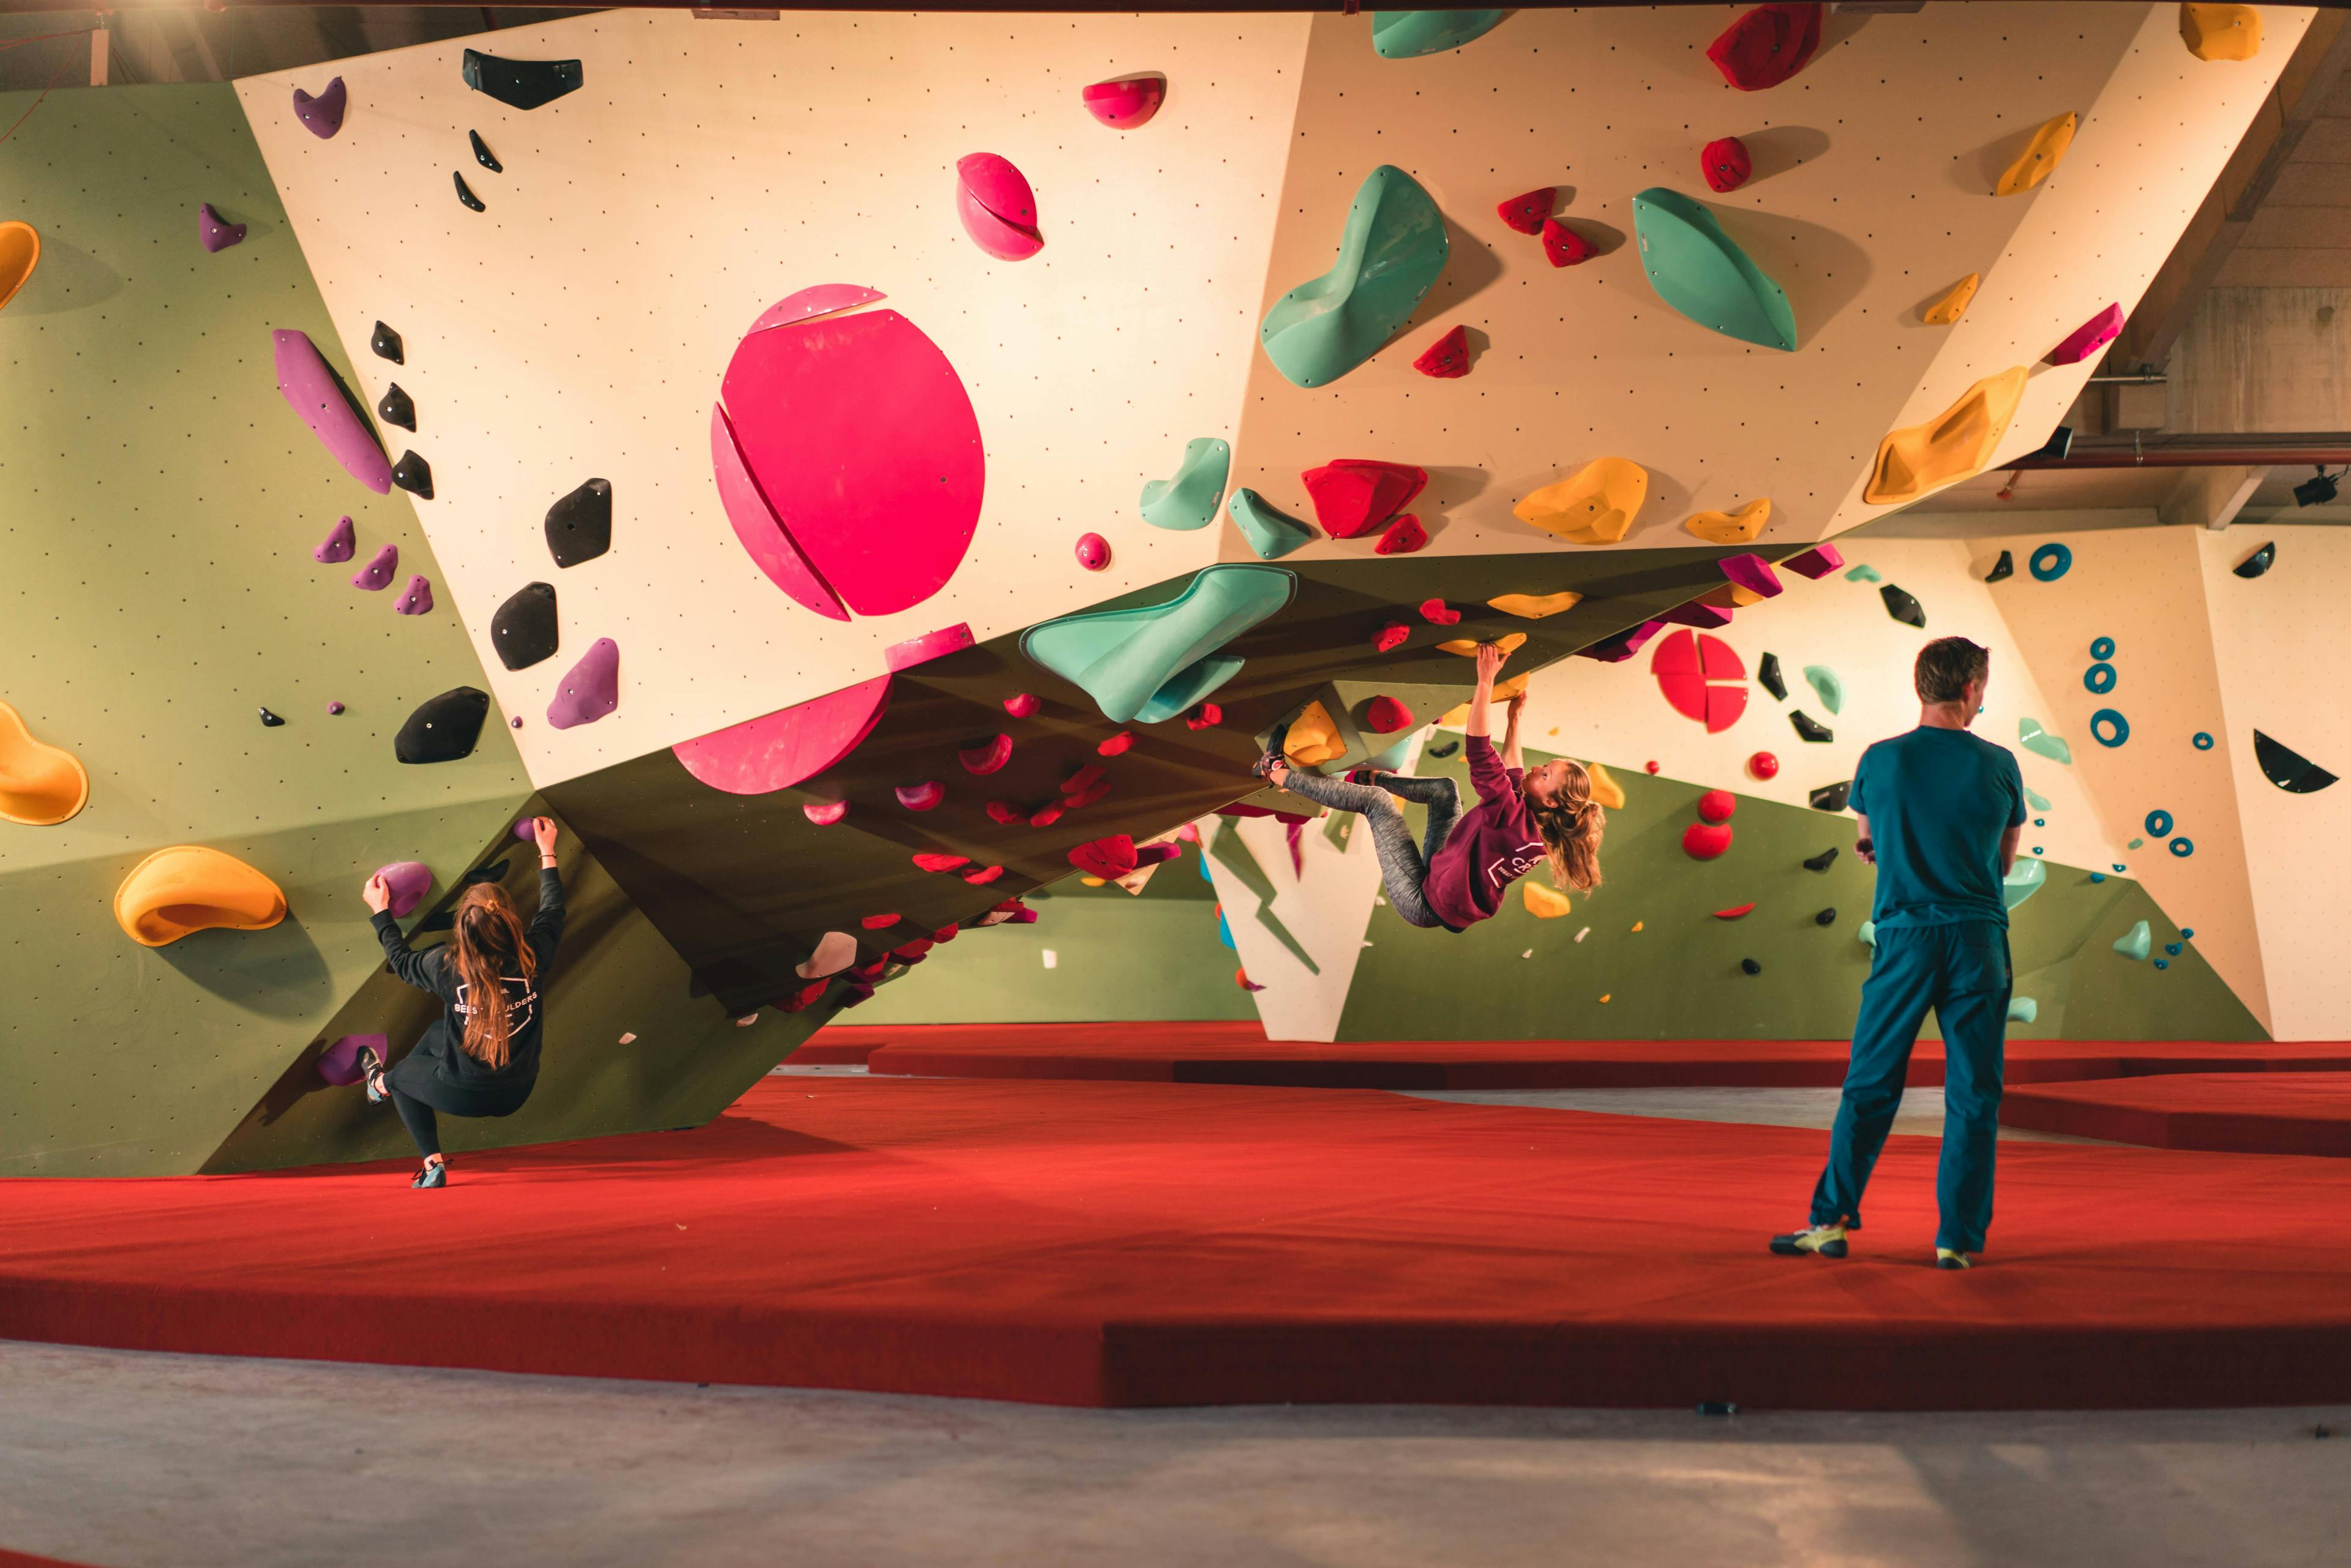 24 Hours West: Black Light Climbing Party at Beest Boulders Amsterdam